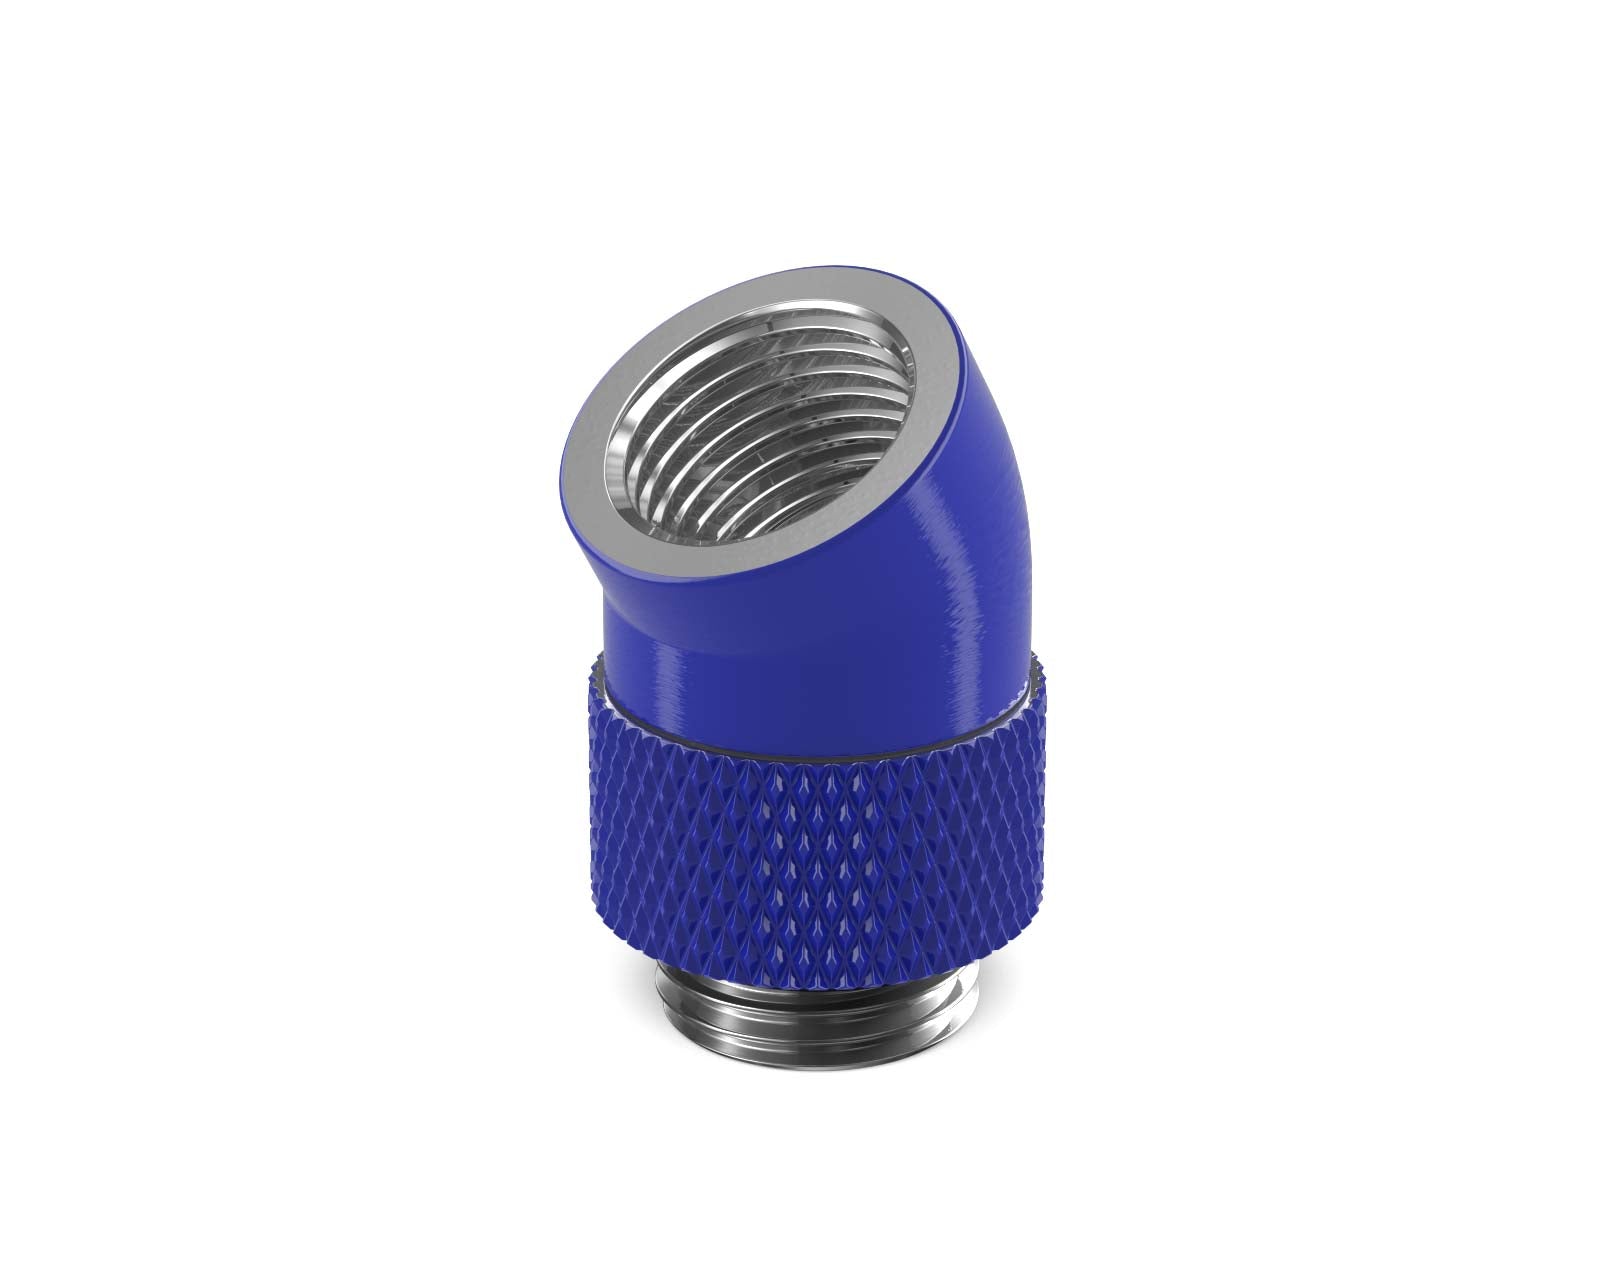 PrimoChill Male to Female G 1/4in. 30 Degree SX Rotary Elbow Fitting - PrimoChill - KEEPING IT COOL True Blue